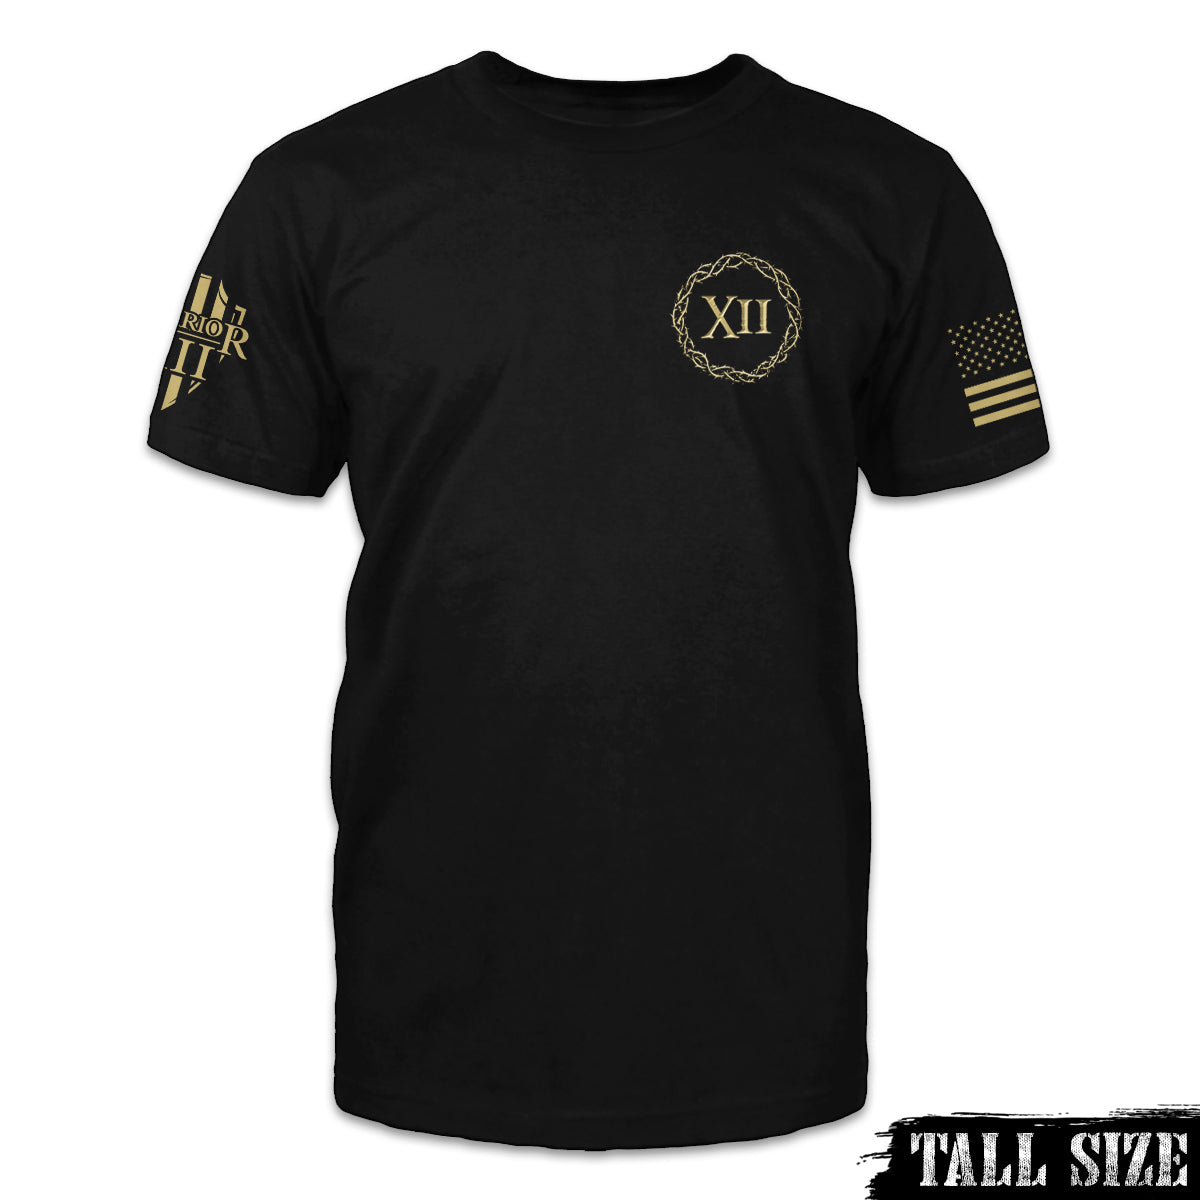 A black tall size shirt with XII with a gold chained reef printed on the front.